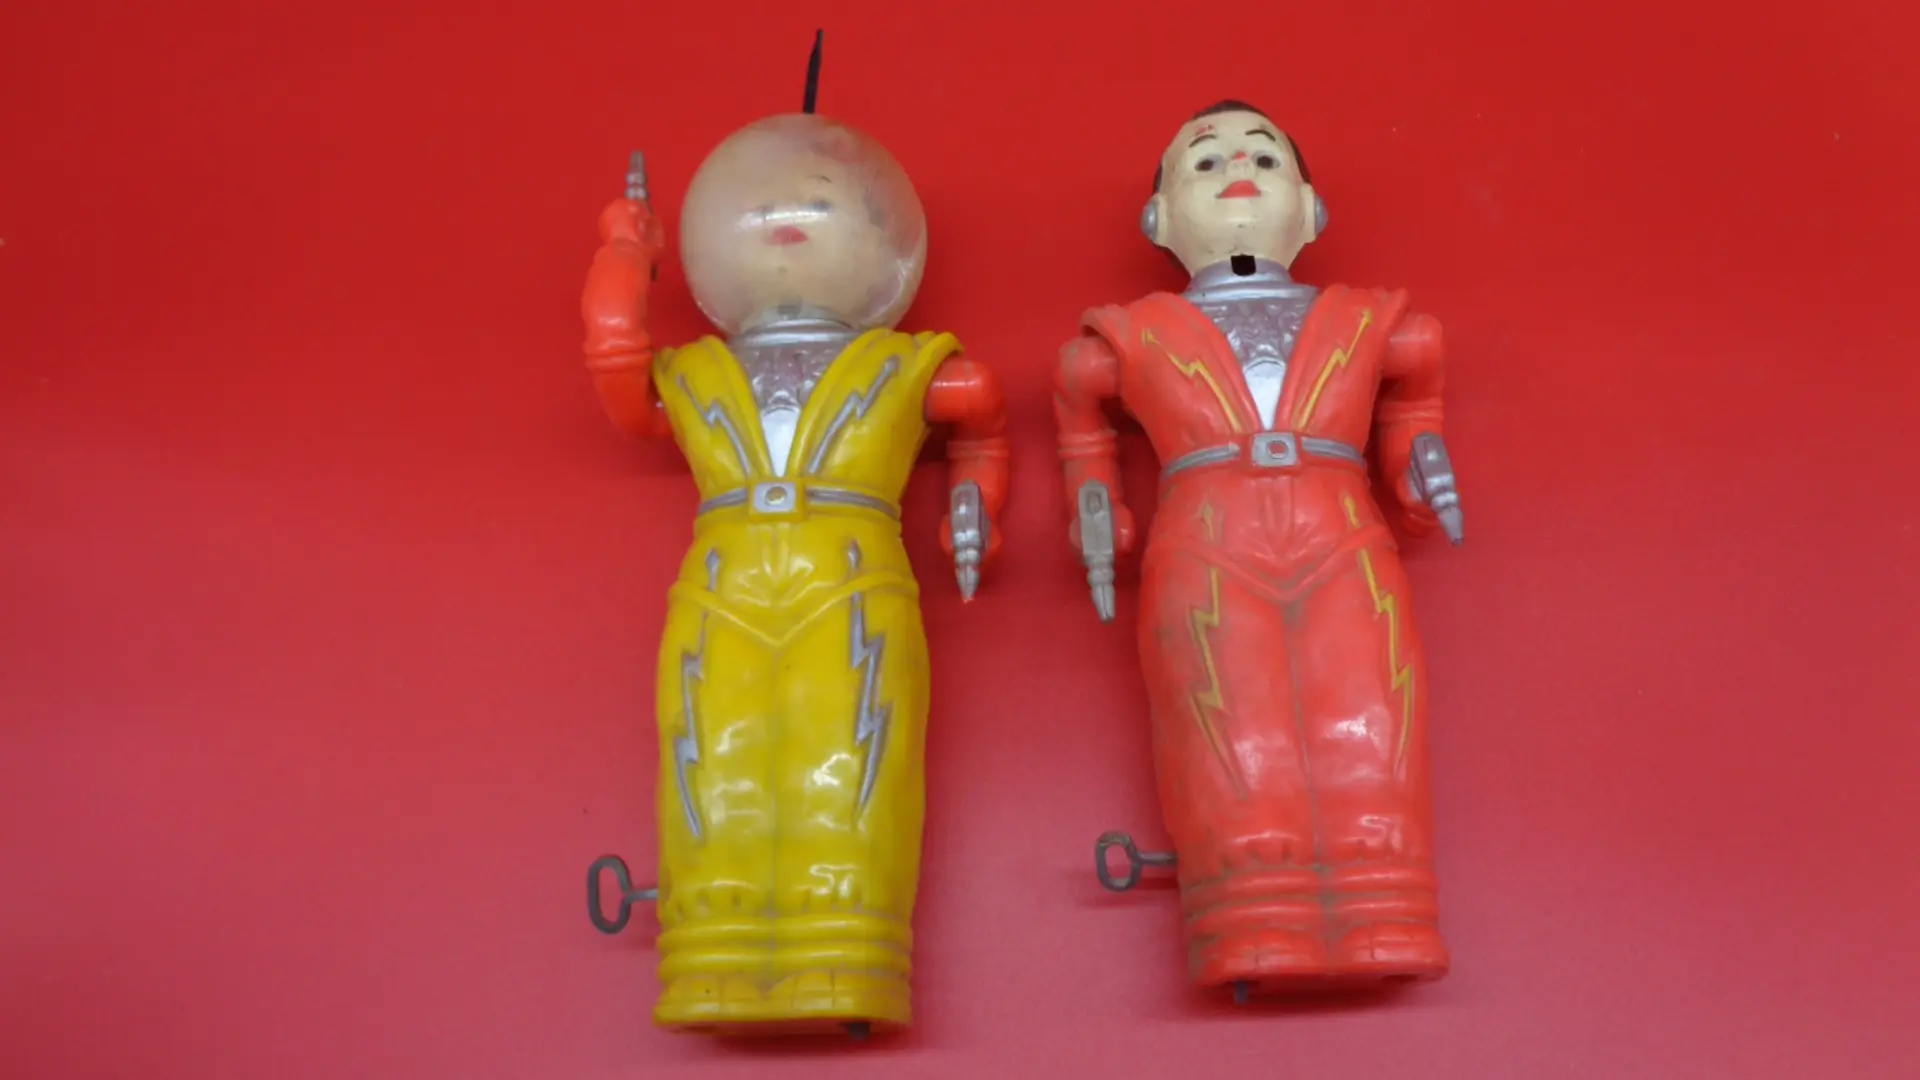 Yellow and orange wind-up spacemen